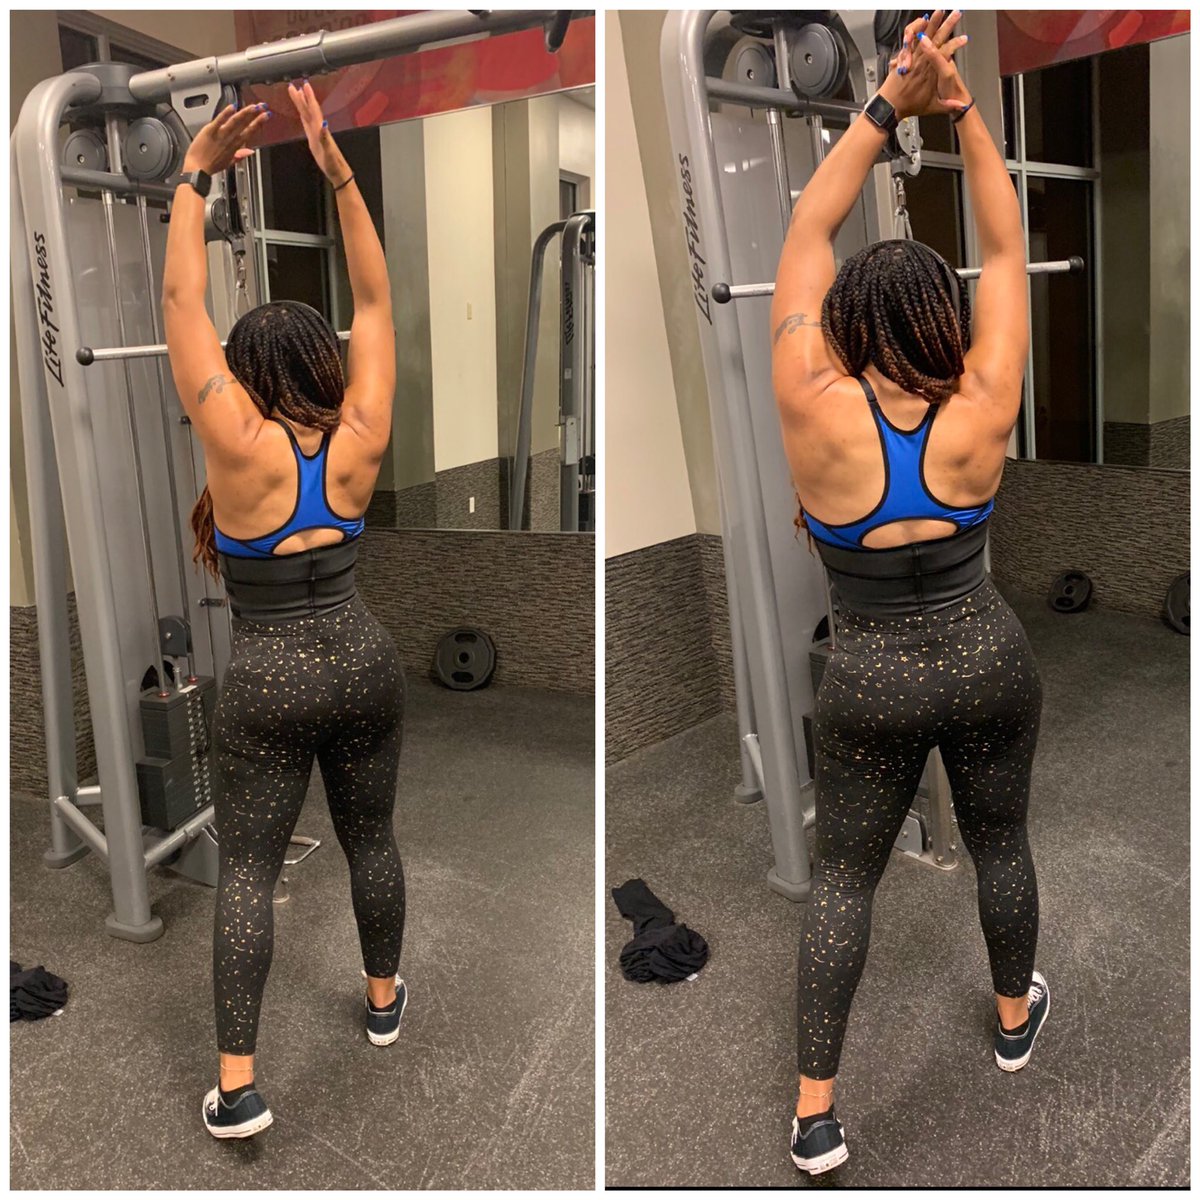 I only strive to be a better version of me. ME VS ME! #nopainnogain #ladieswholift #ladymuscle #stillmyset 💪🏽